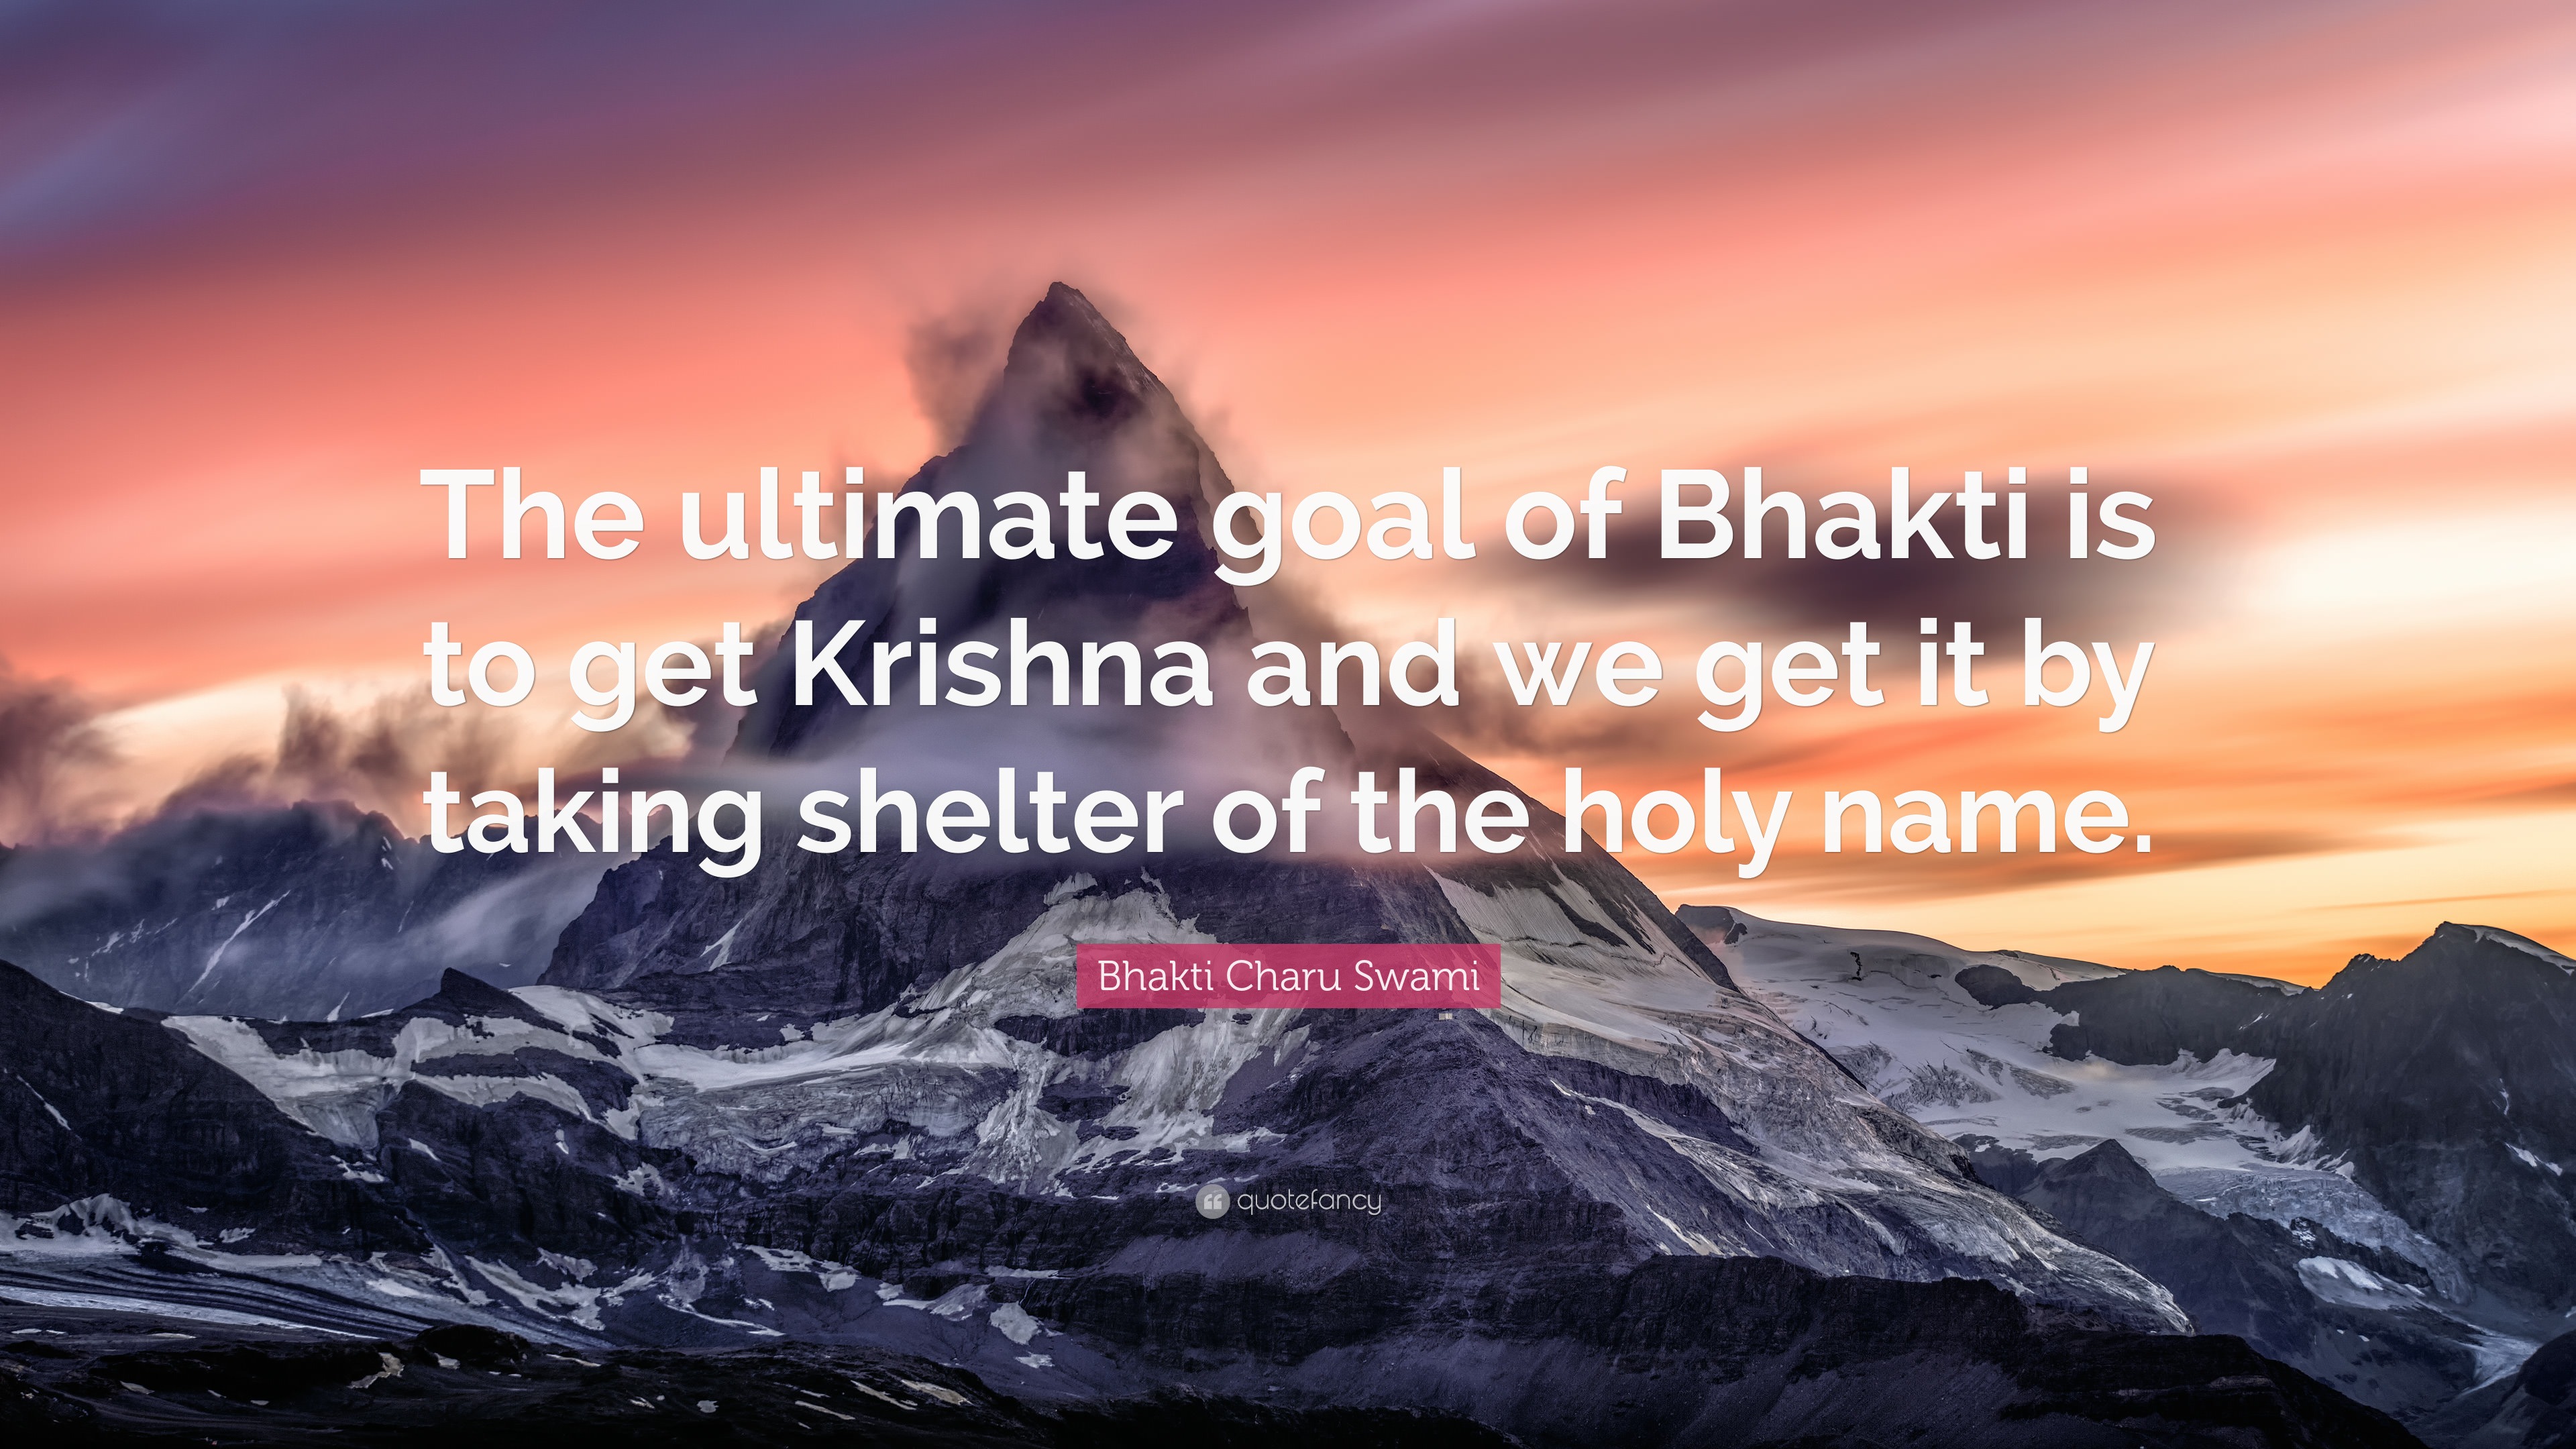 Bhakti Charu Swami Quote: “The ultimate goal of Bhakti is to get Krishna  and we get